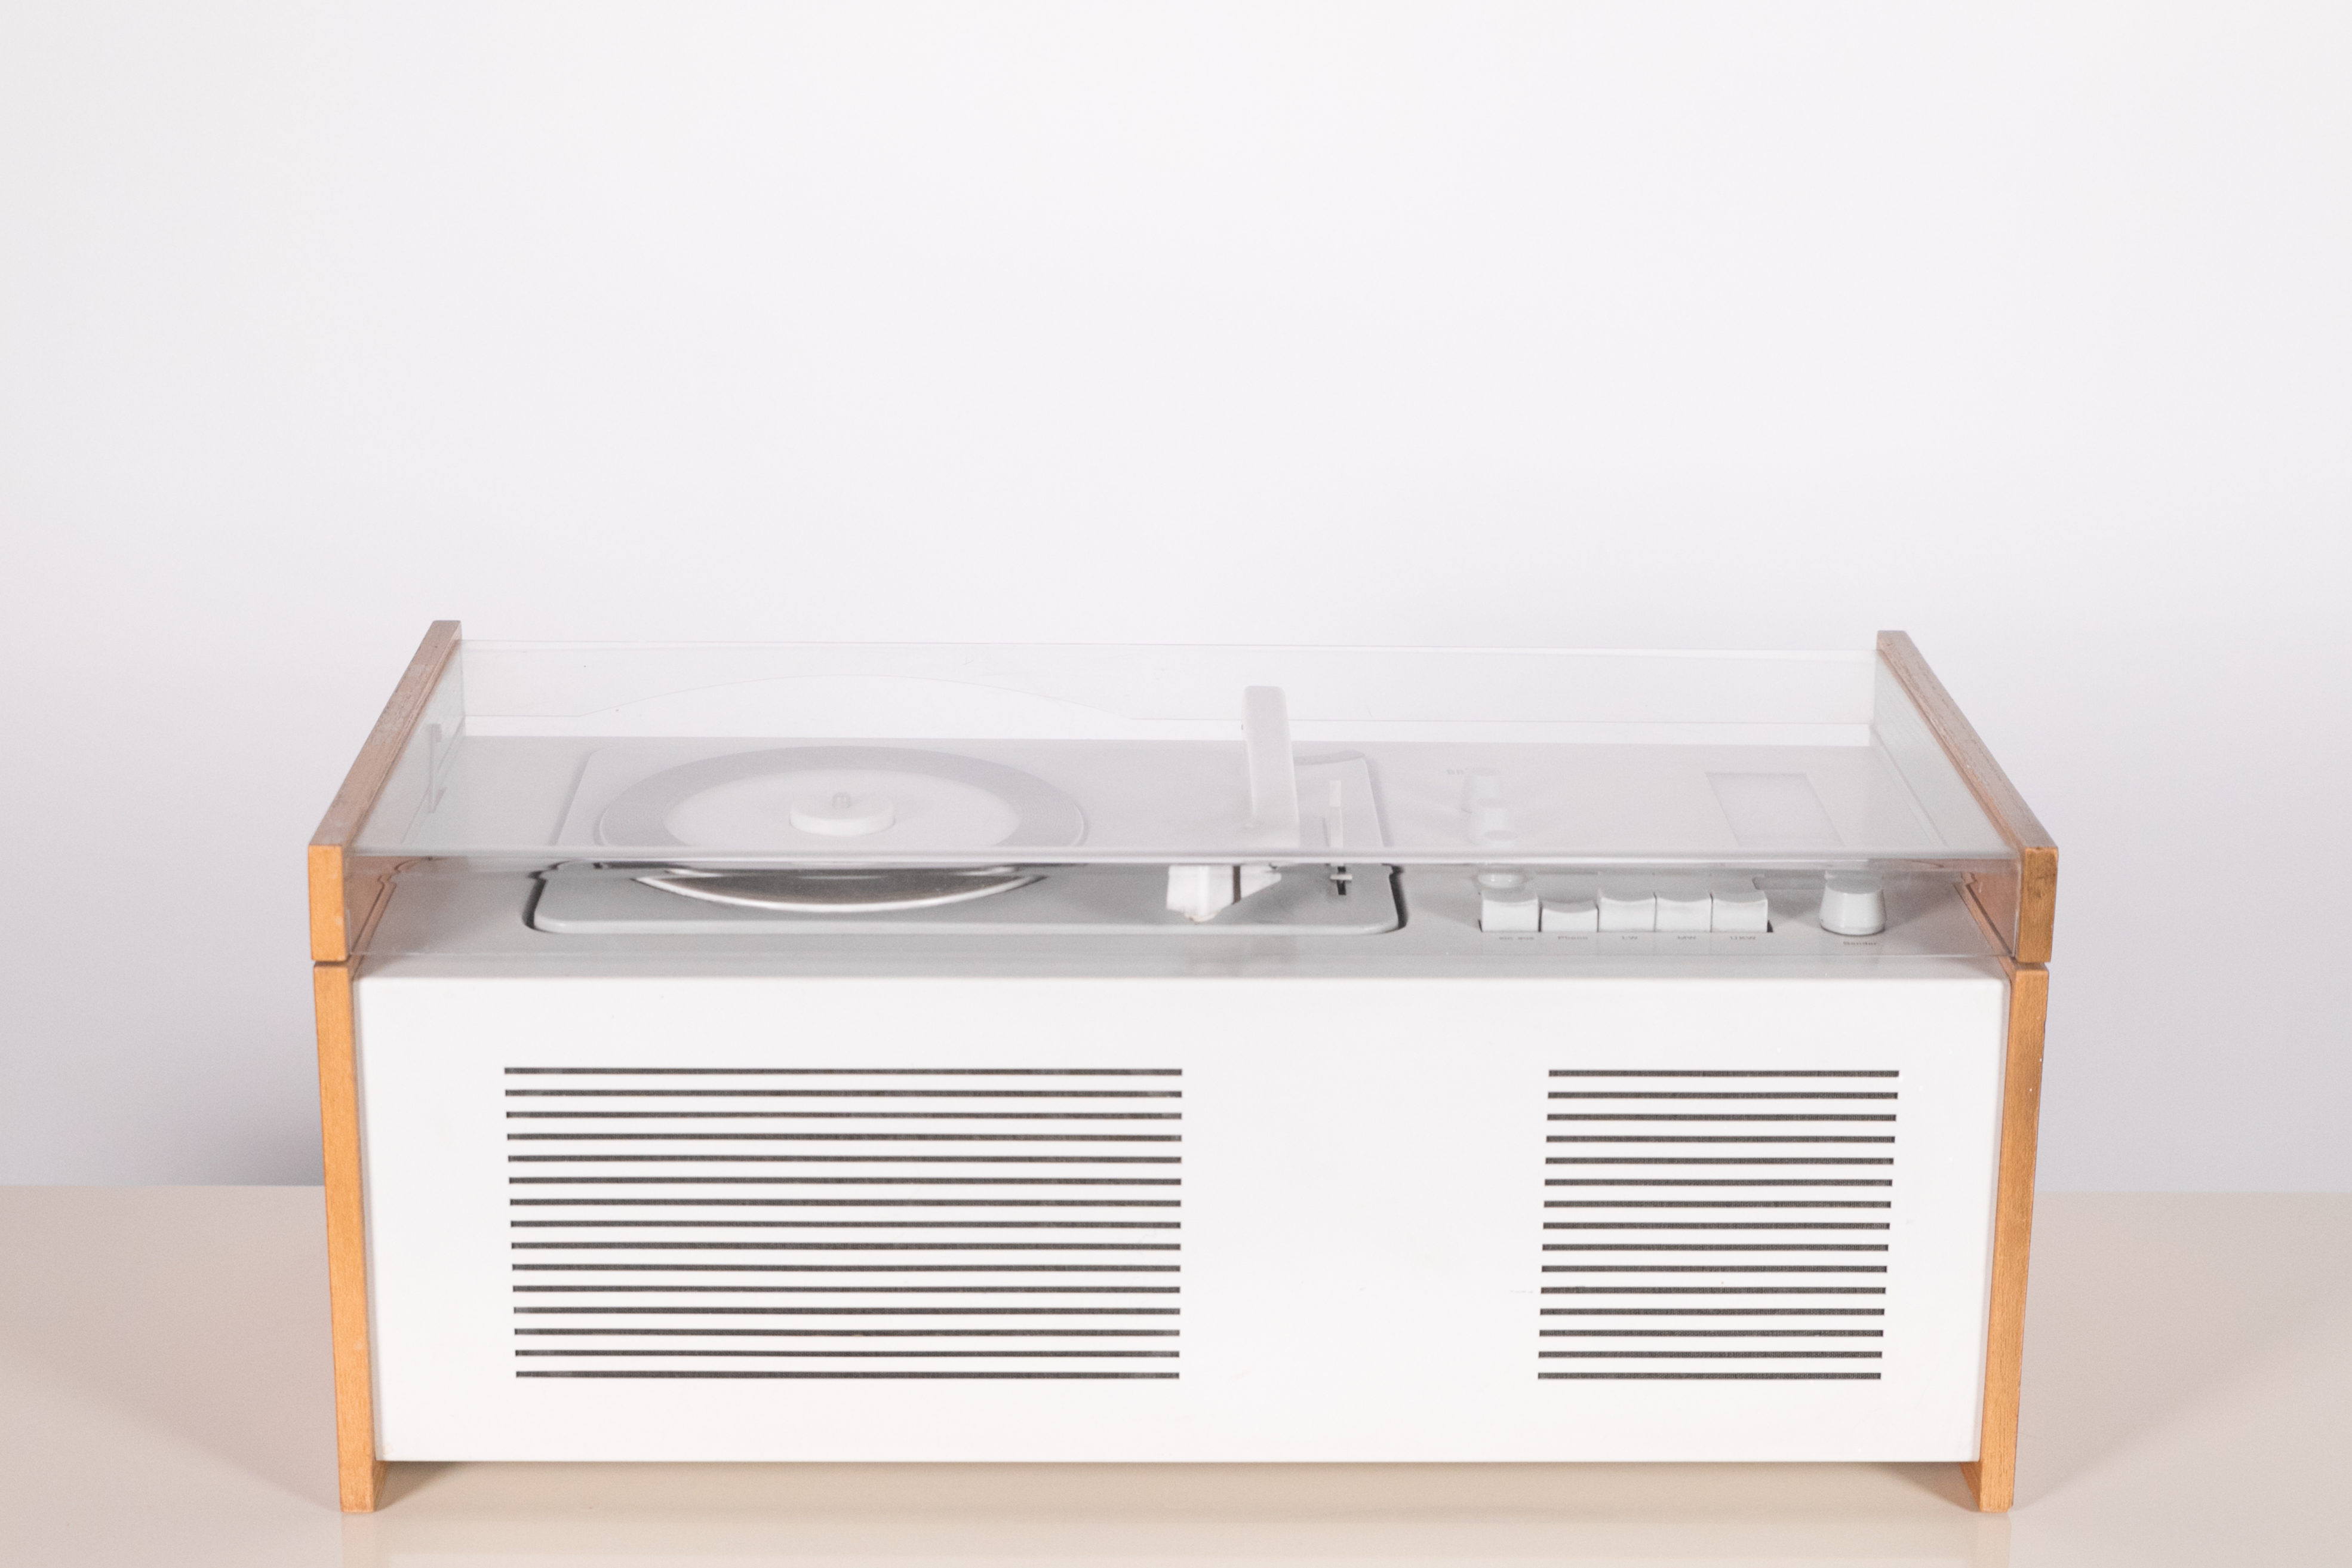 Record Player Sk4 By Hans Gugelot And Dieter Rams For Braun